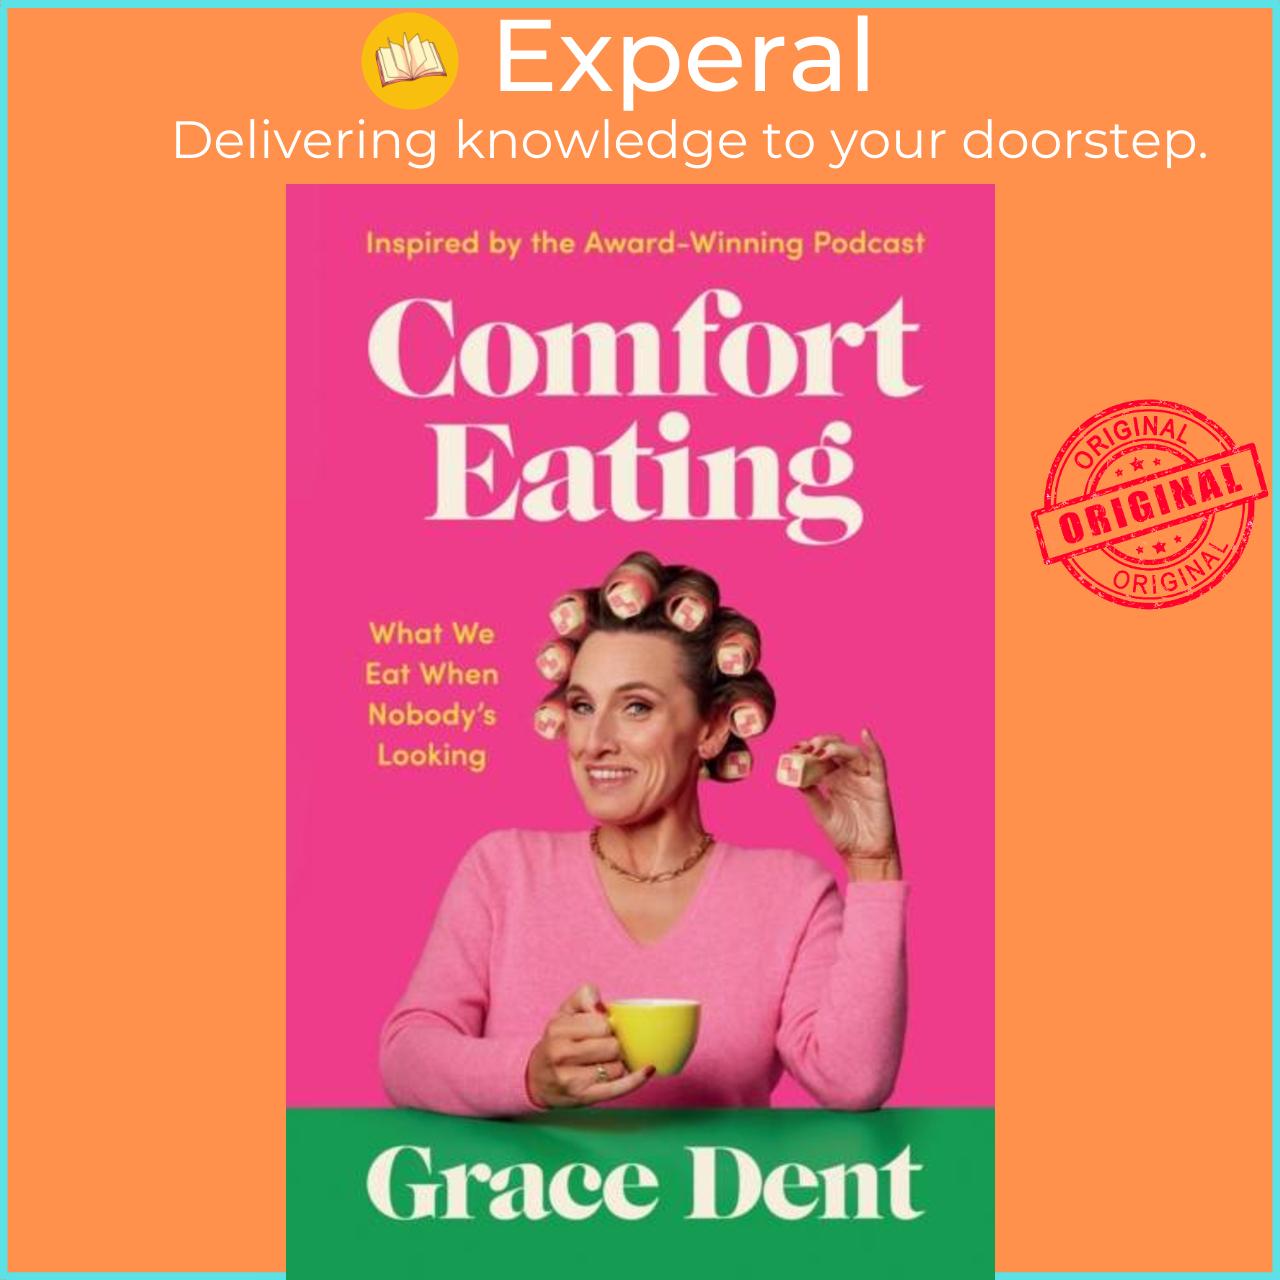 Sách - Comfort Eating - What We Eat When Nobody's Looking by Grace Dent (UK edition, hardcover)